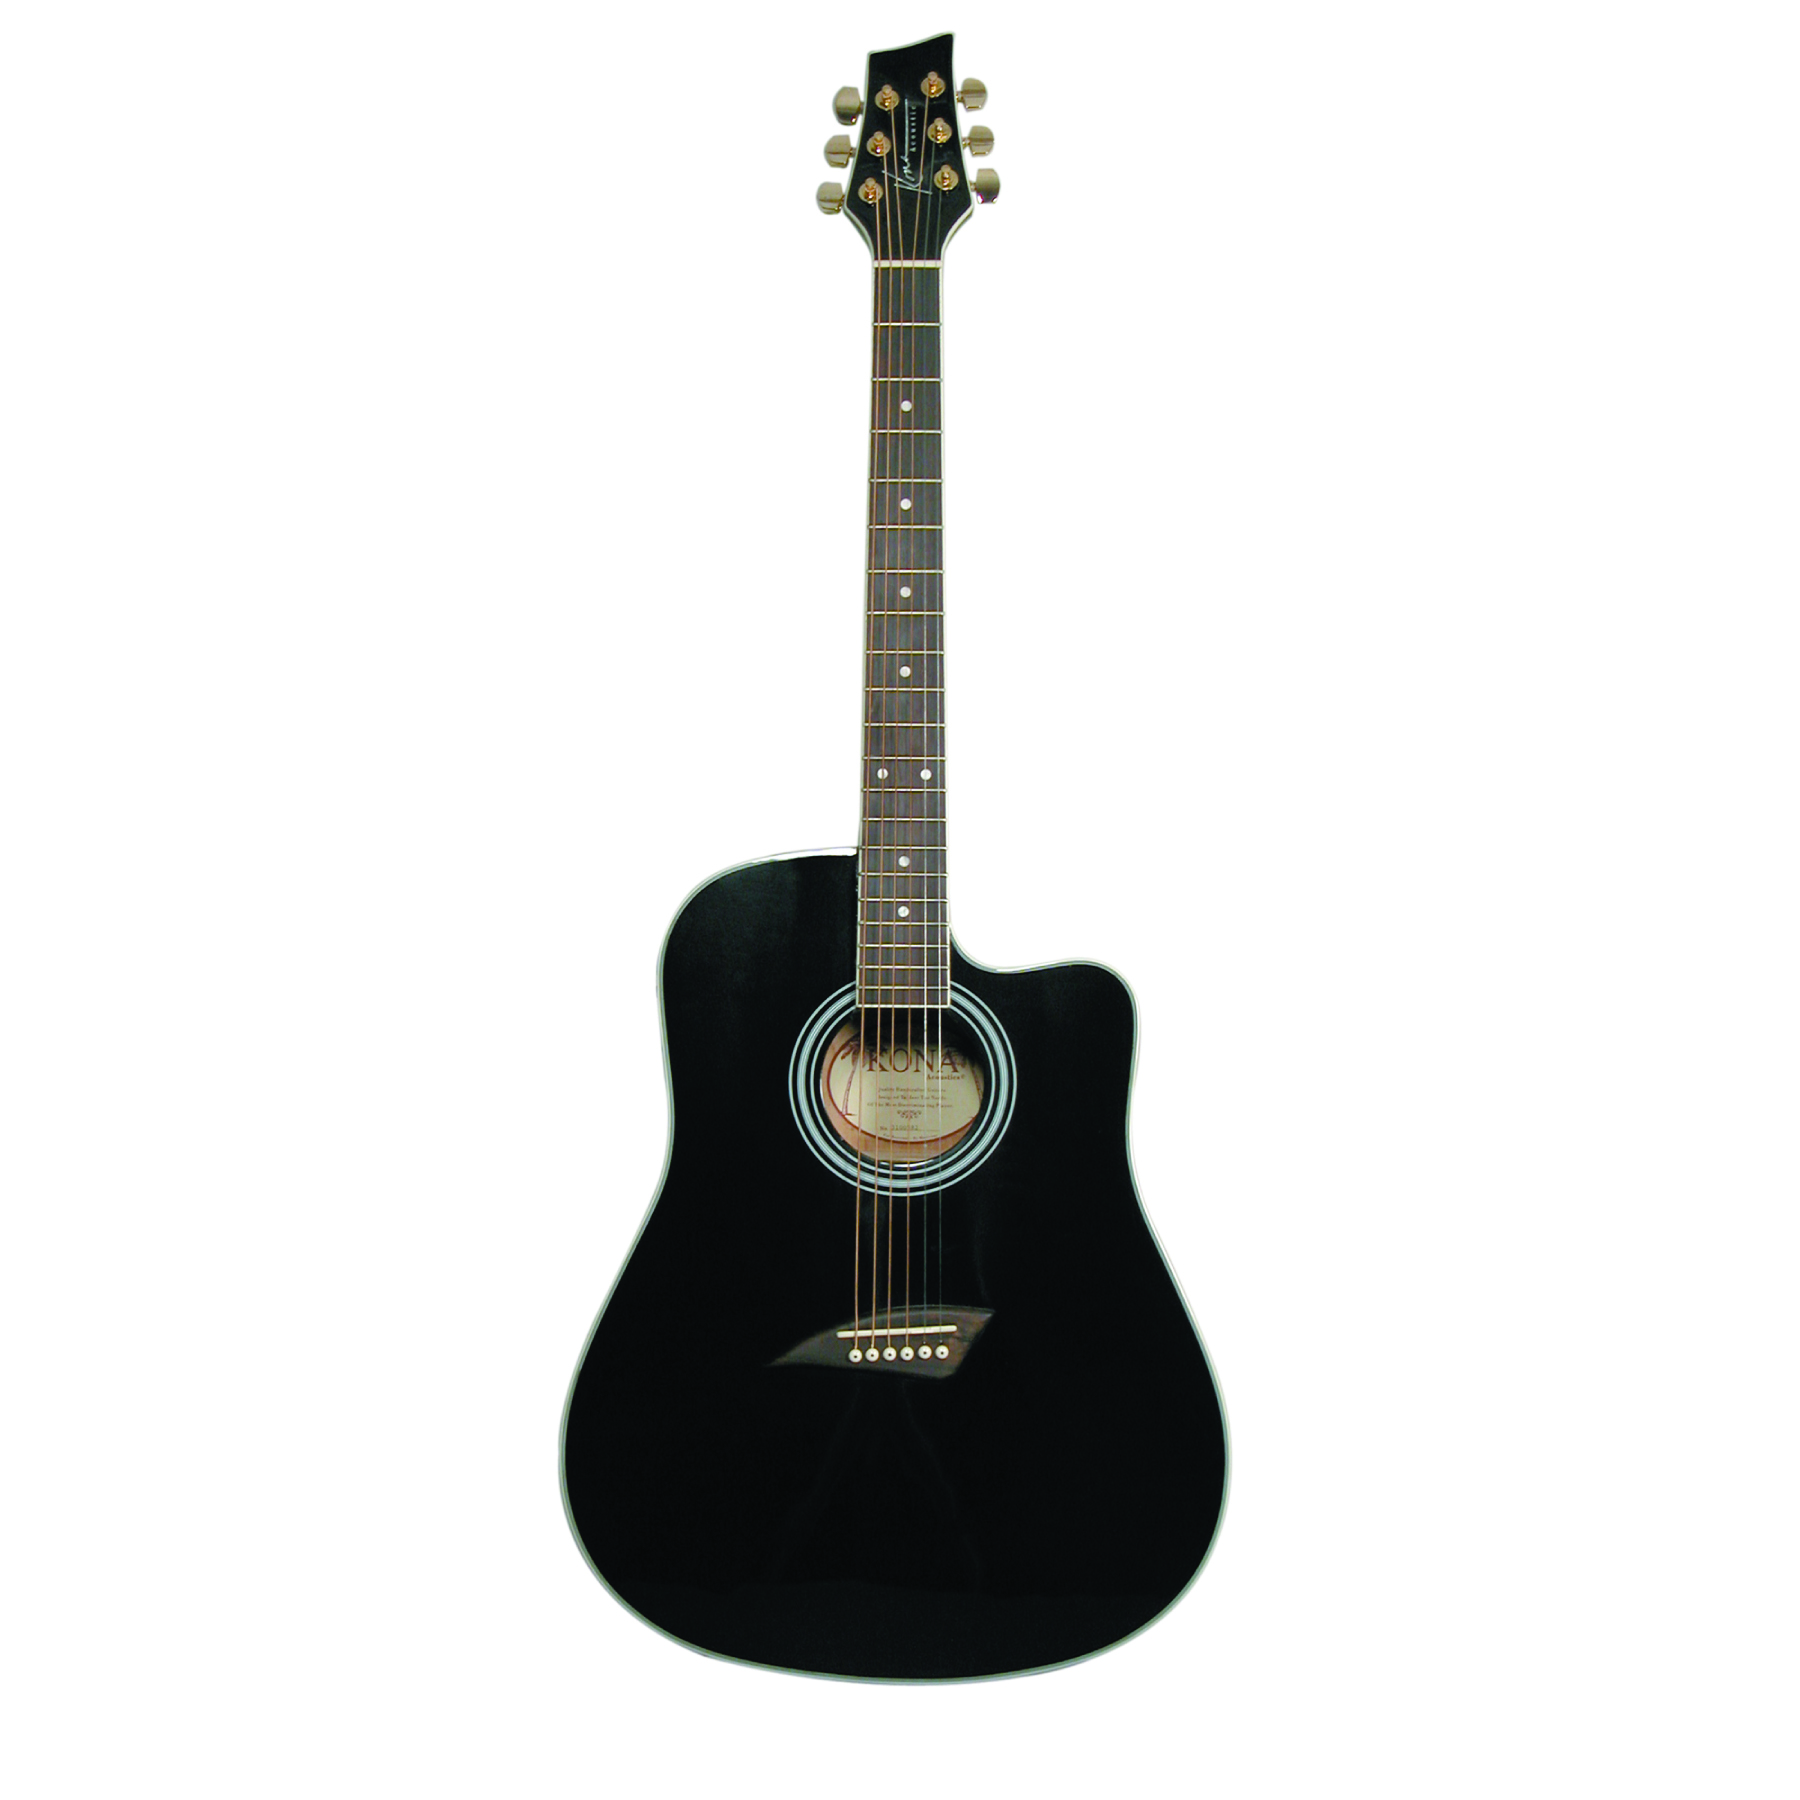 Kona Dreadnought Acoustic-Electric Spruce Top Guitar with High-Gloss Black Finish